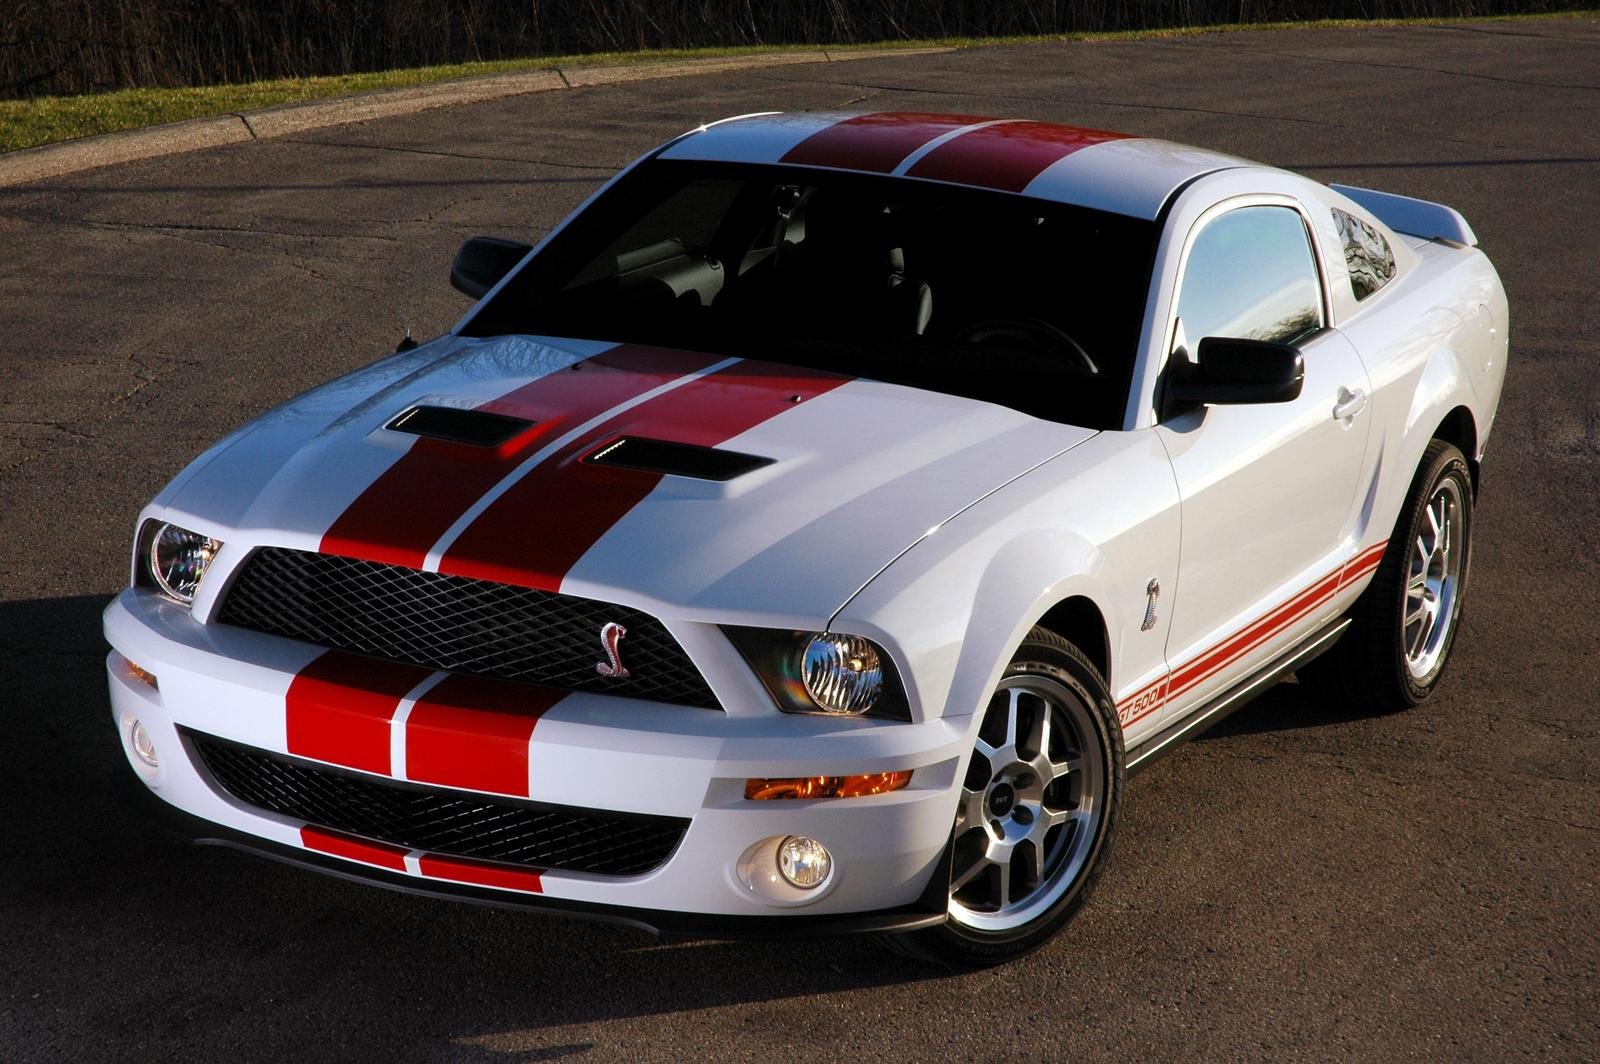 Mustang Of The Day: 2007 Ford Mustang Shelby GT500 Red Stripe Appearance